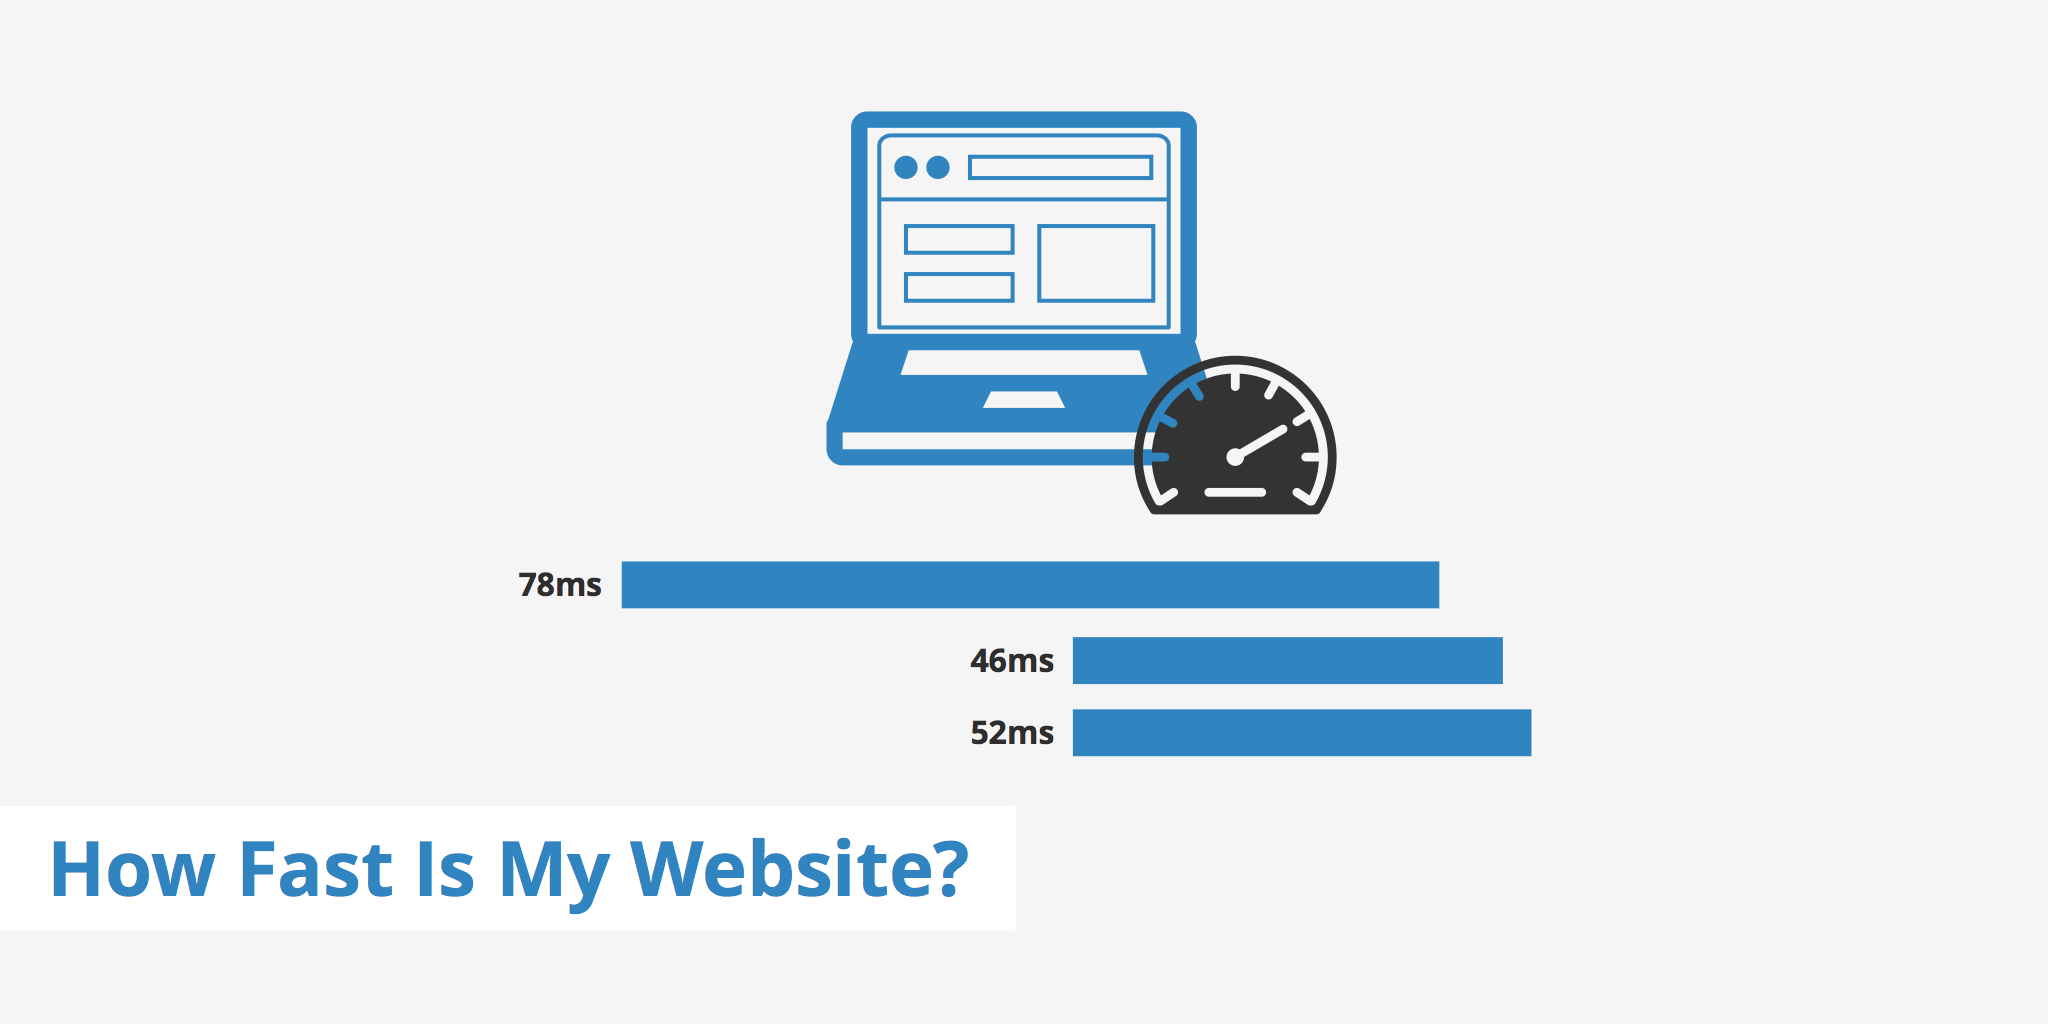 Answering the Question - How Fast Is My Website?